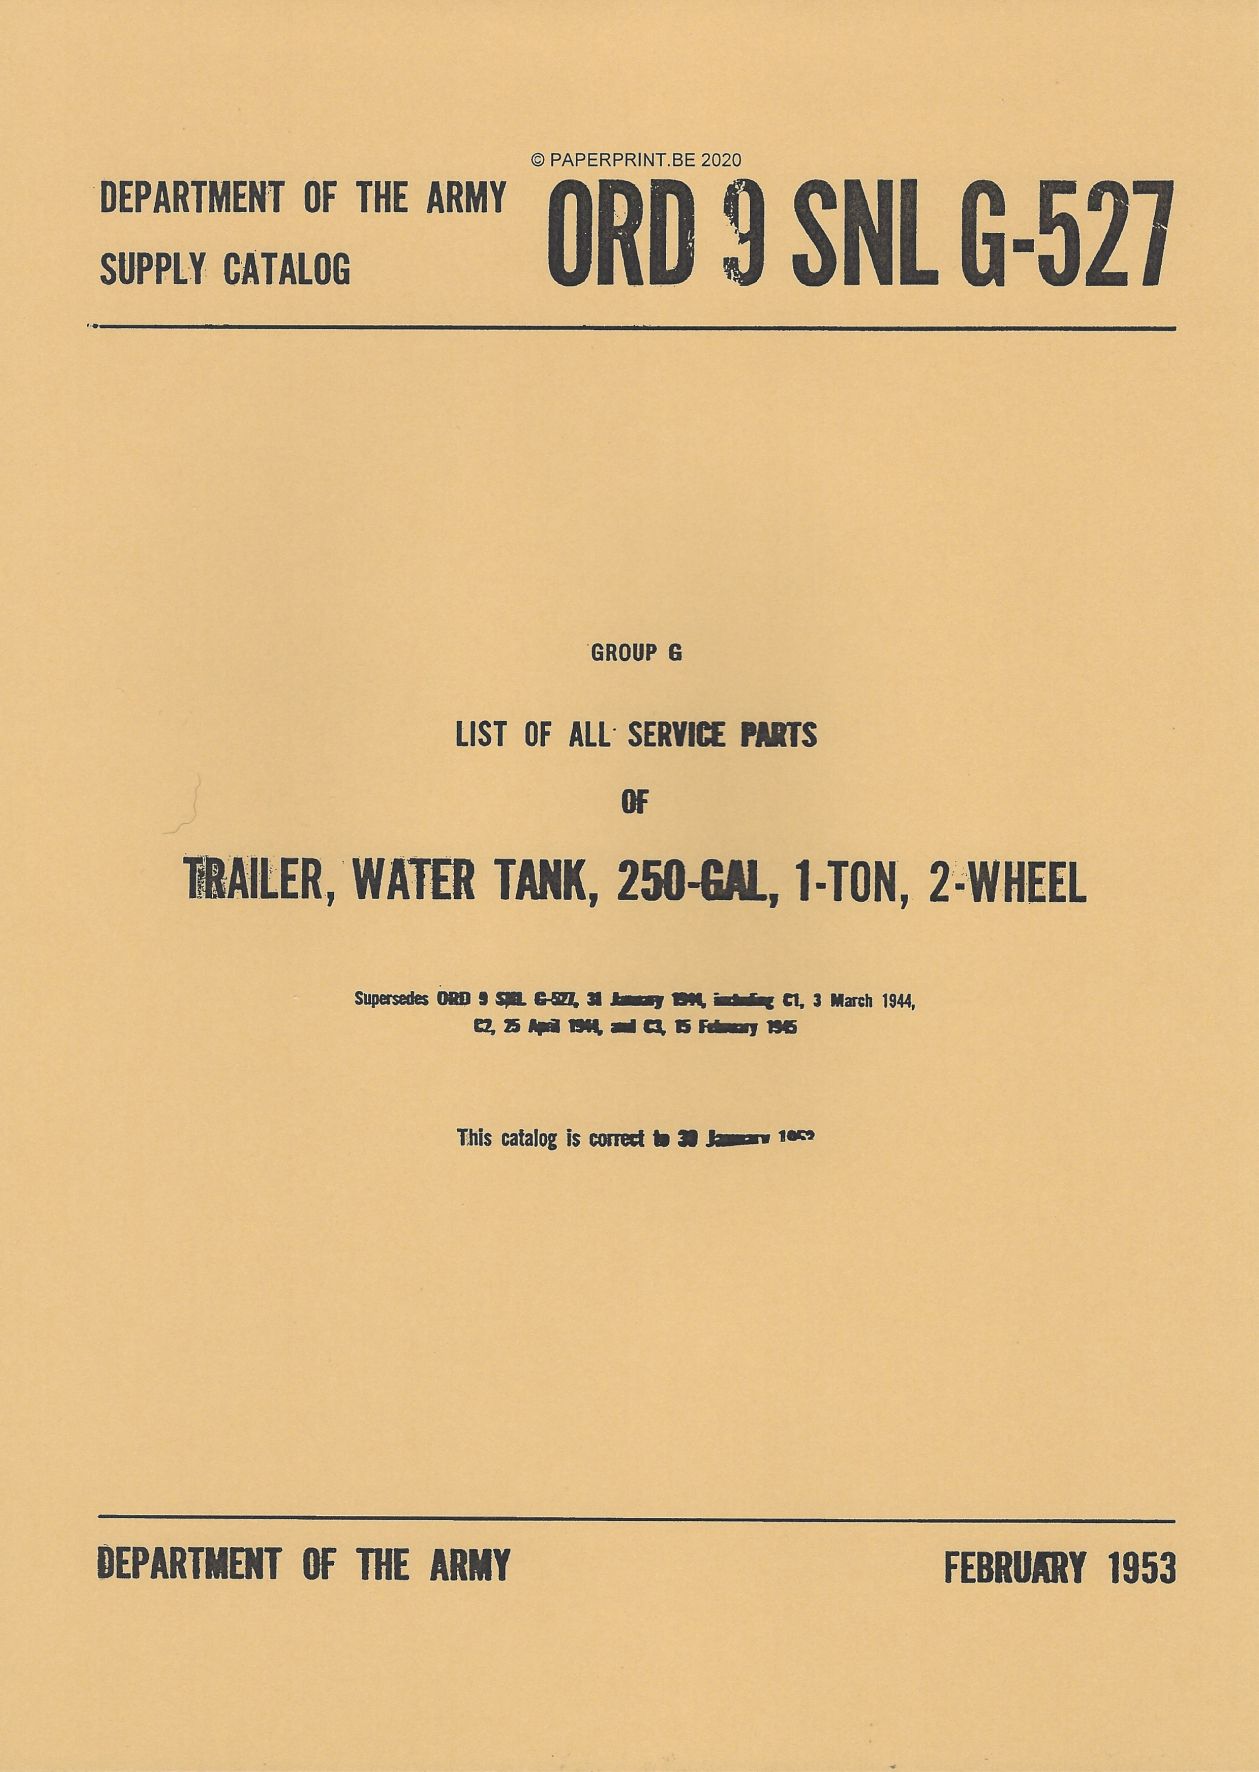 SNL G-527 US LIST OF ALL SERVICE PARTS OF TRAILER, WATER TANK, 250-GAL, 1-TON,2-WHEEL